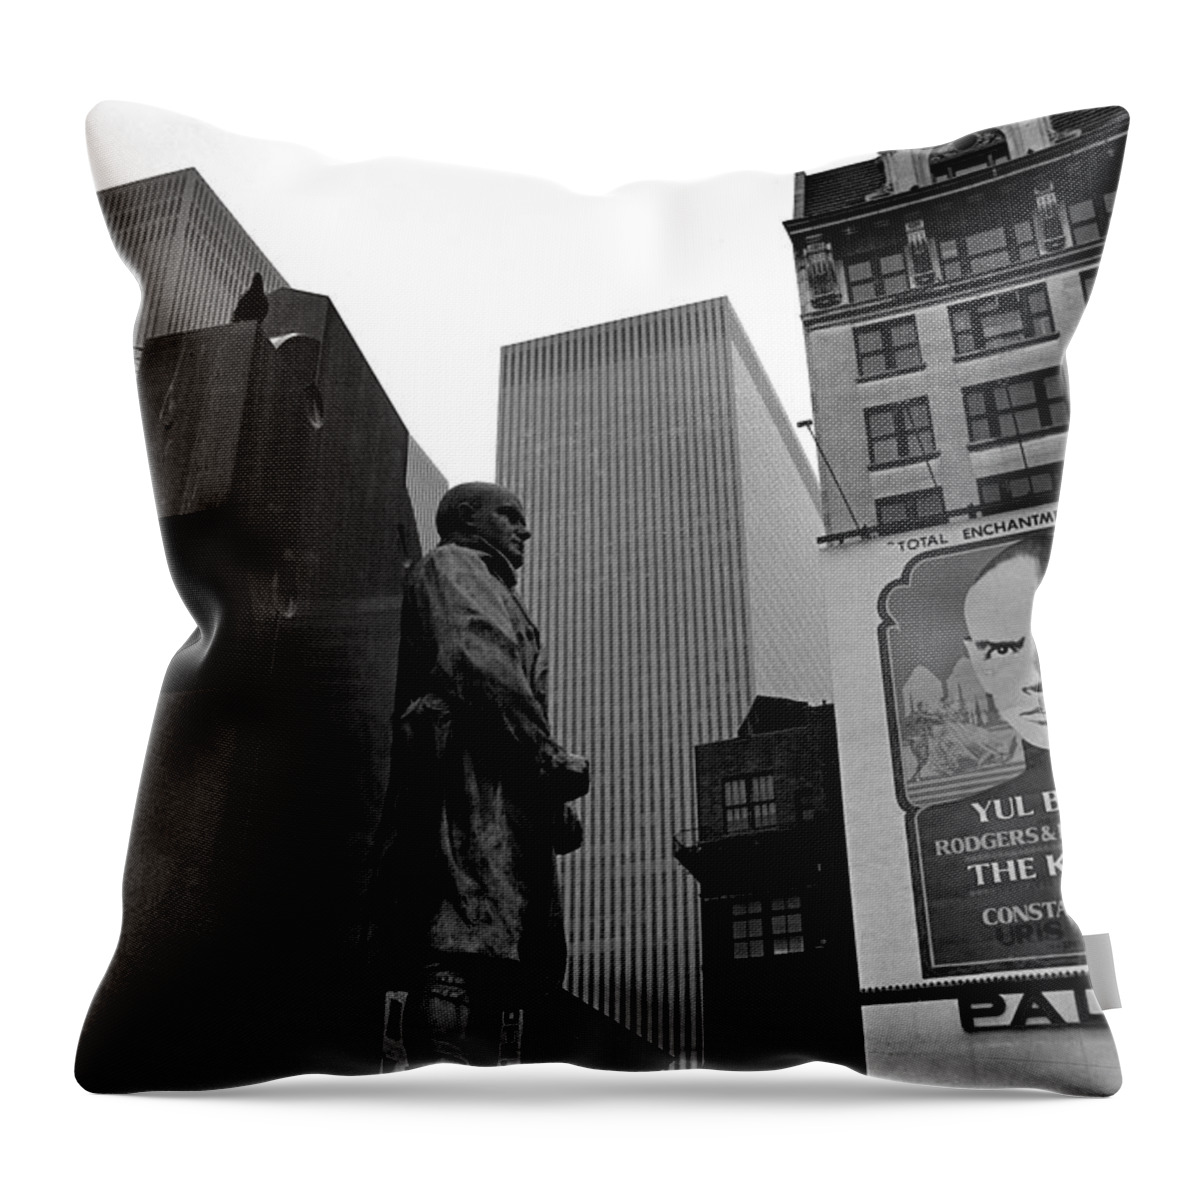 Times Square Fr. Dufy Statue Palace Theater Yul Brynner New York City 1977 Throw Pillow featuring the photograph Times Square Fr. Dufy statue Palace Theater Yul Brynner NYC 1977 by David Lee Guss